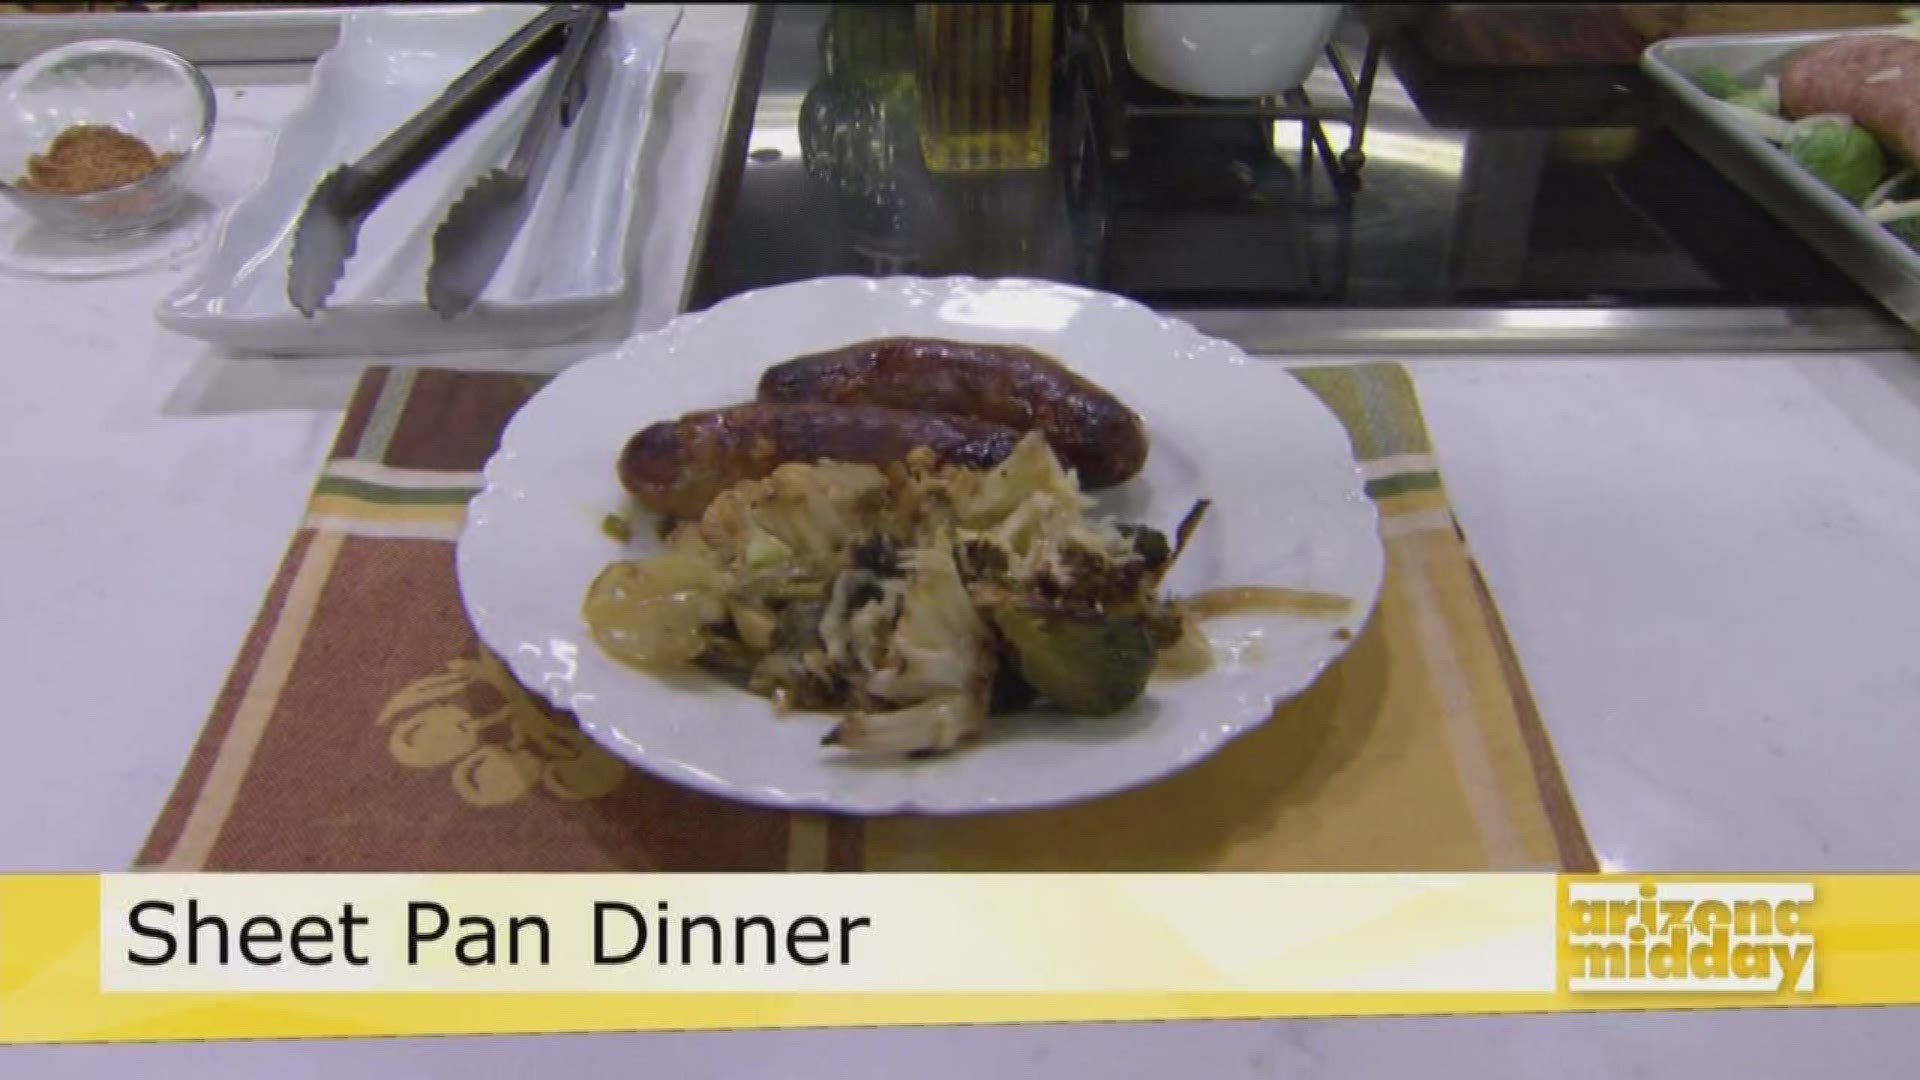 Jan shows us the perfect way to get a quick delicious dinner on the table with just a few ingredients